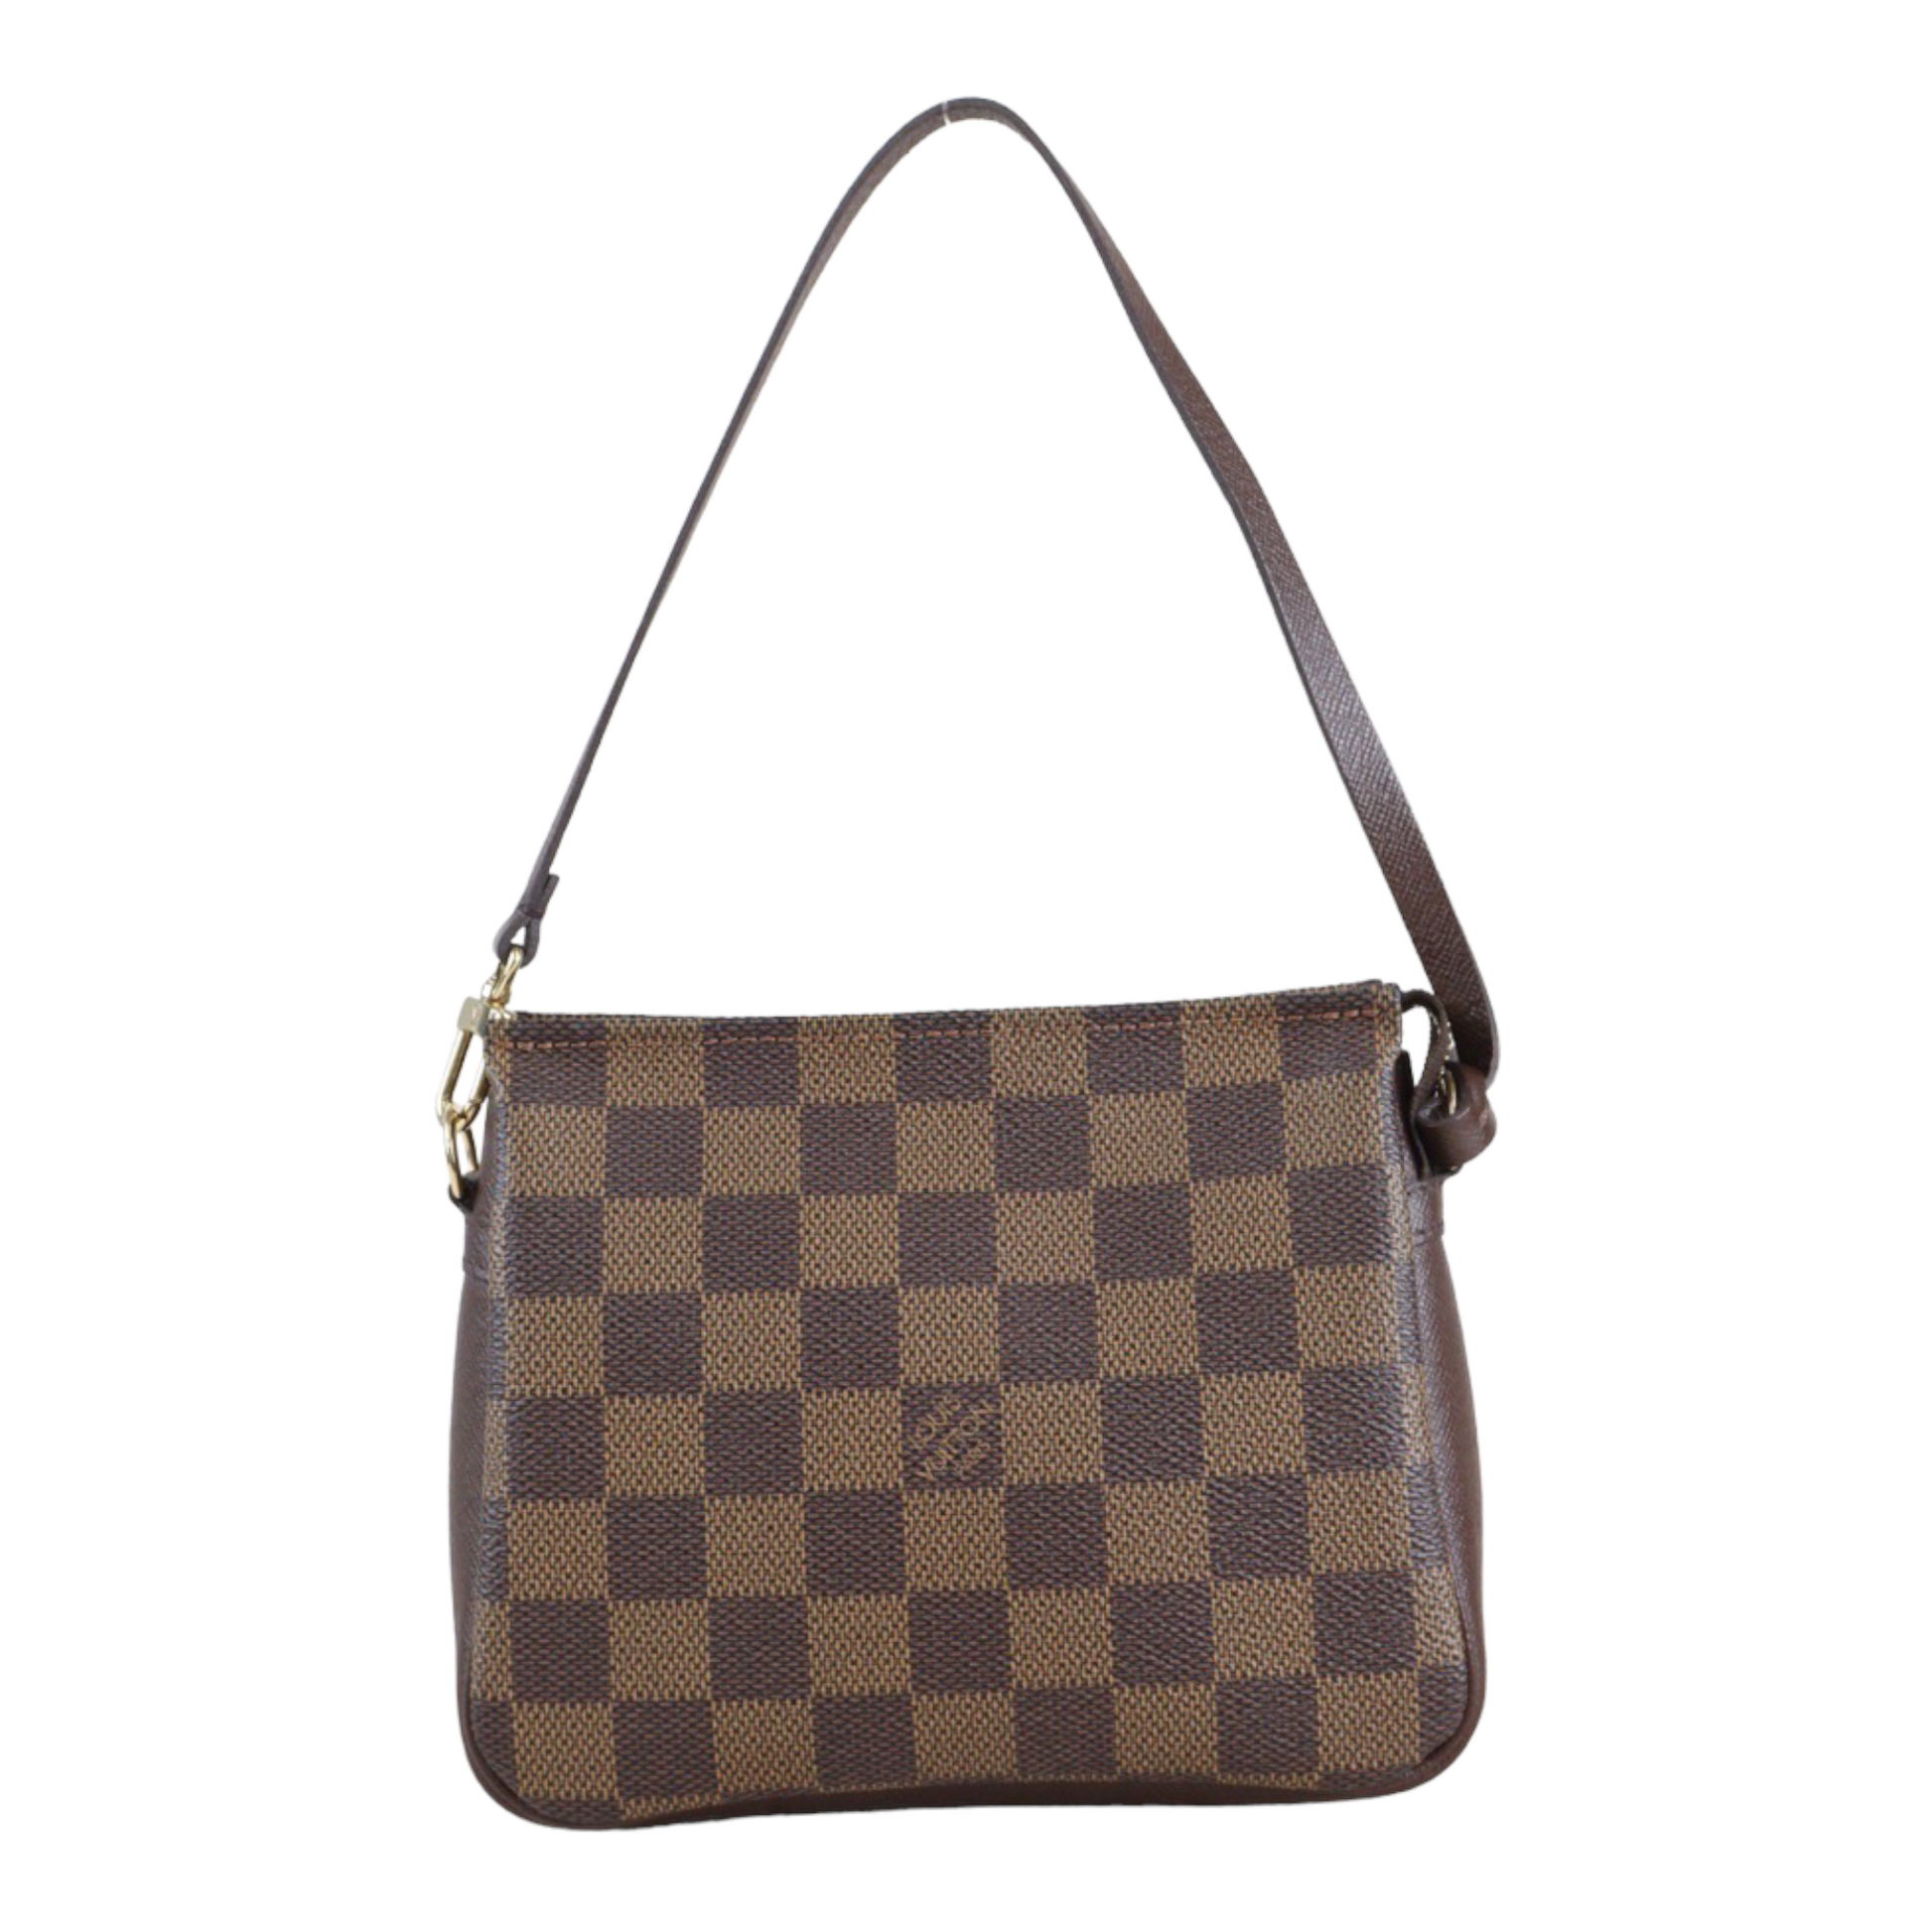 Lucky Louis Vuitton Purchases – MyLadyMarie